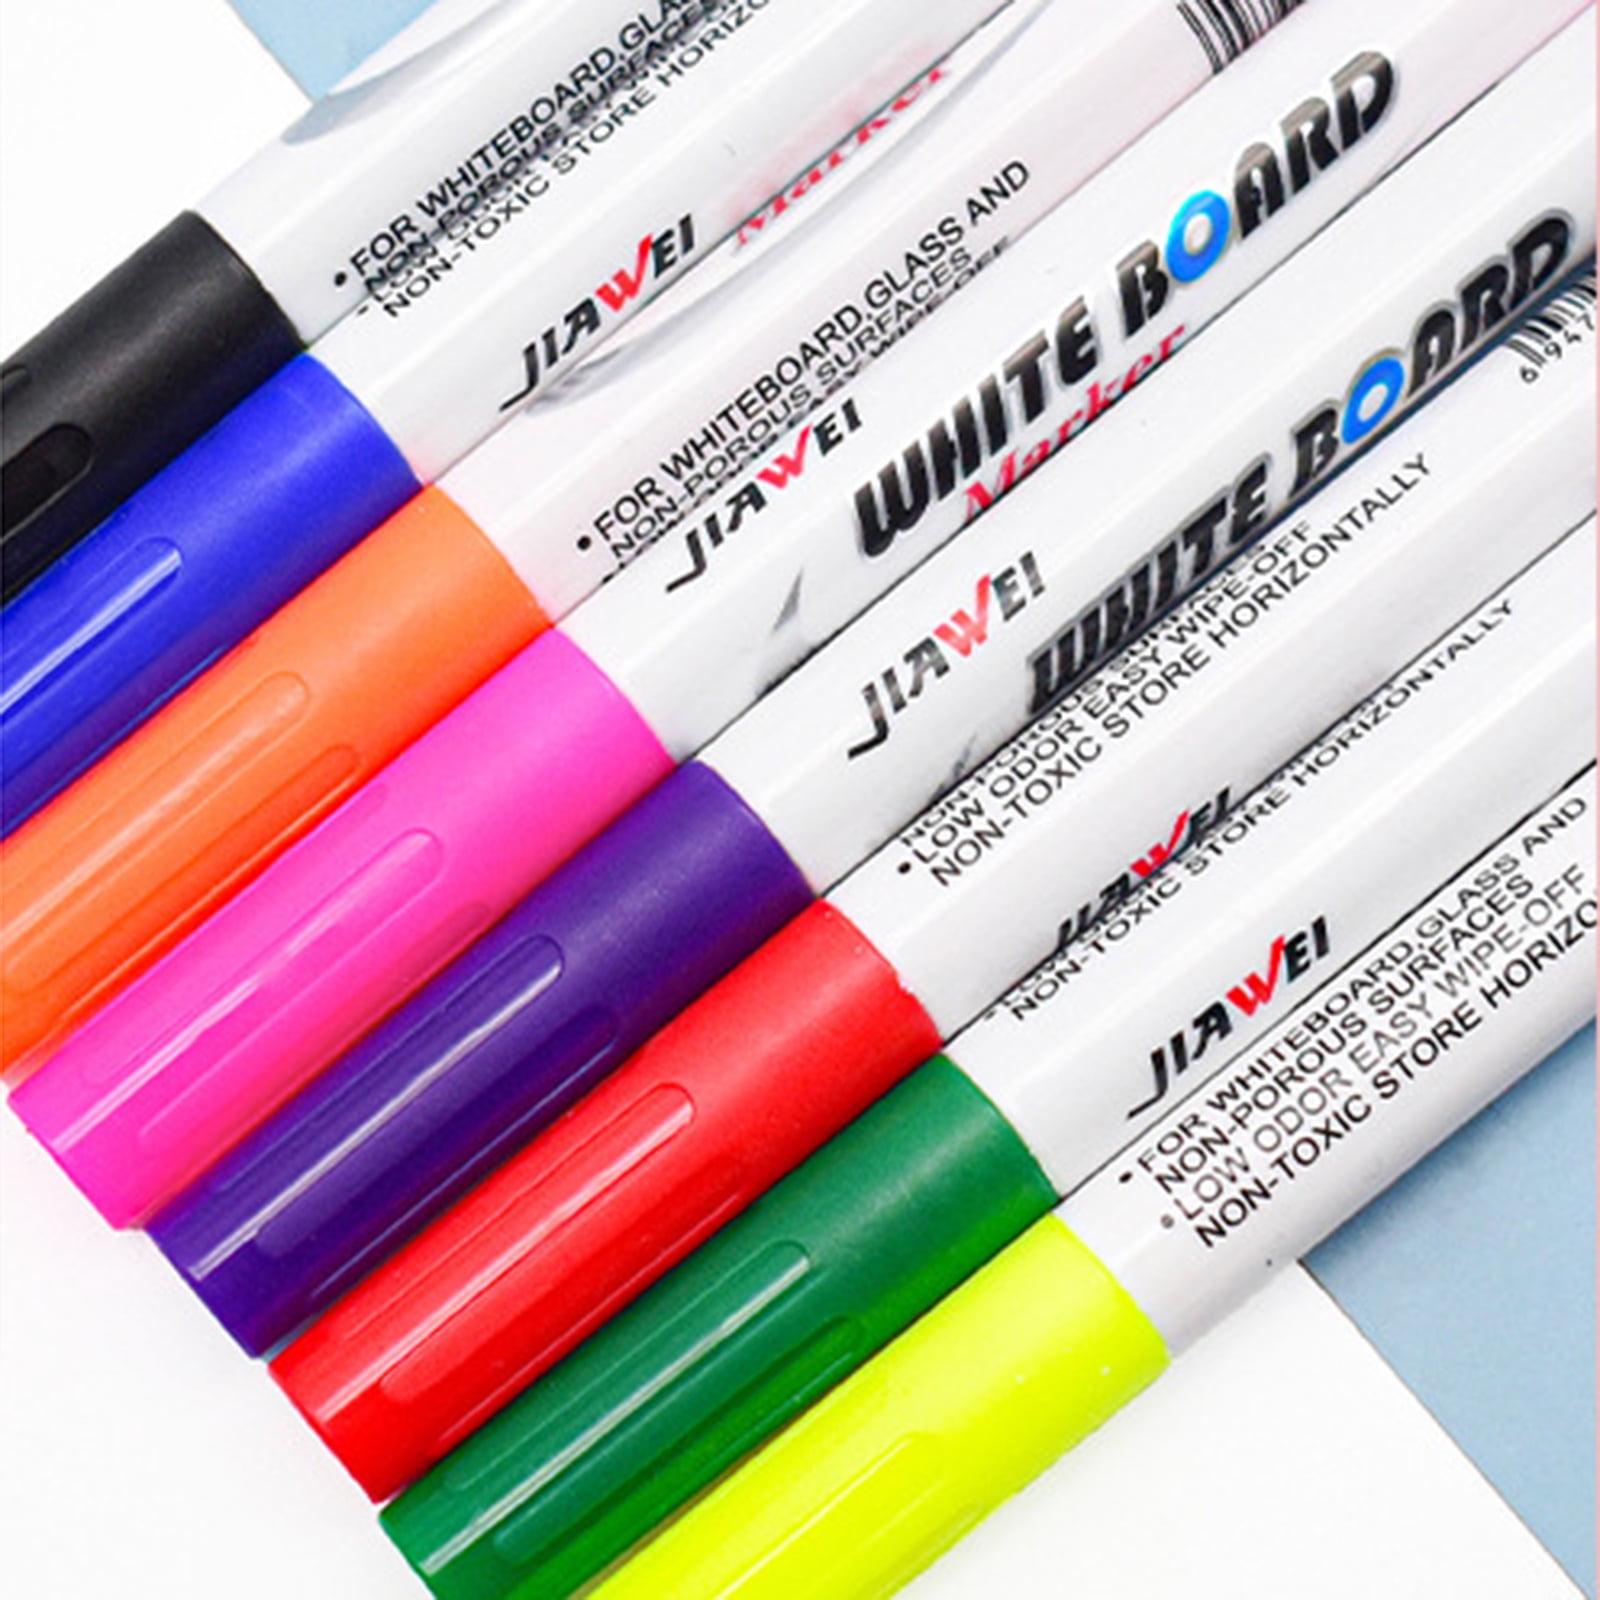 KNOW POP Whiteboard Marker/Ink 8 Colors Flat Thick Head 5/12mm Water-based  Repeated Filling Erasable Pen New G-0622/0625/0311